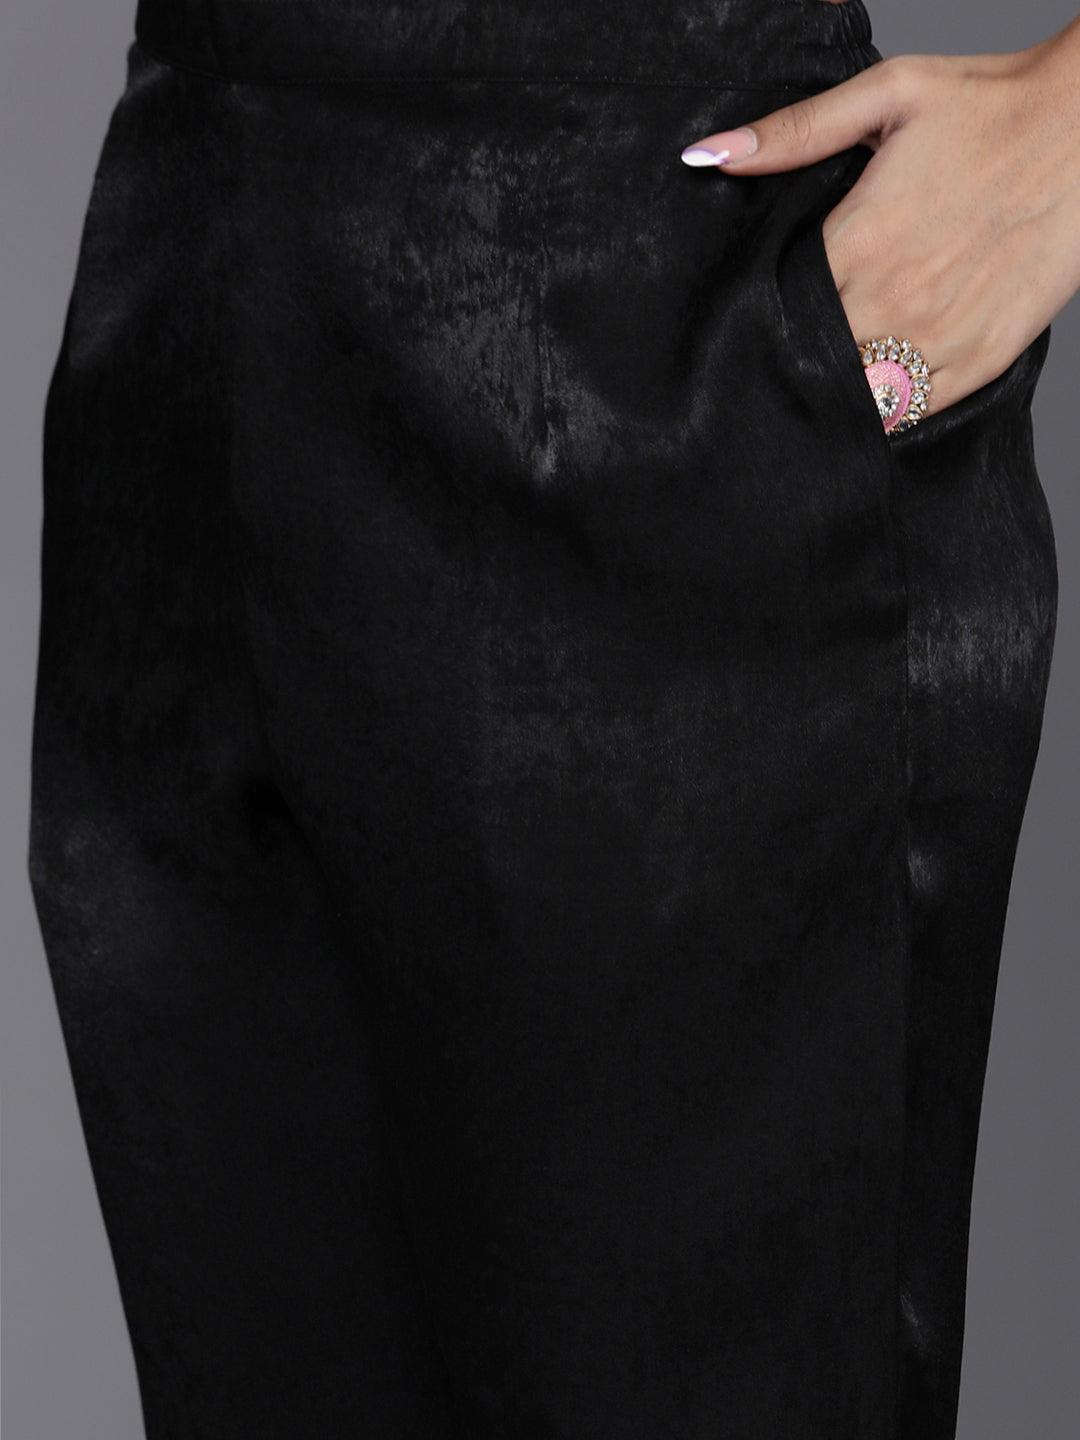 Black Embroidered Polyester Straight Kurta With Trousers - Libas